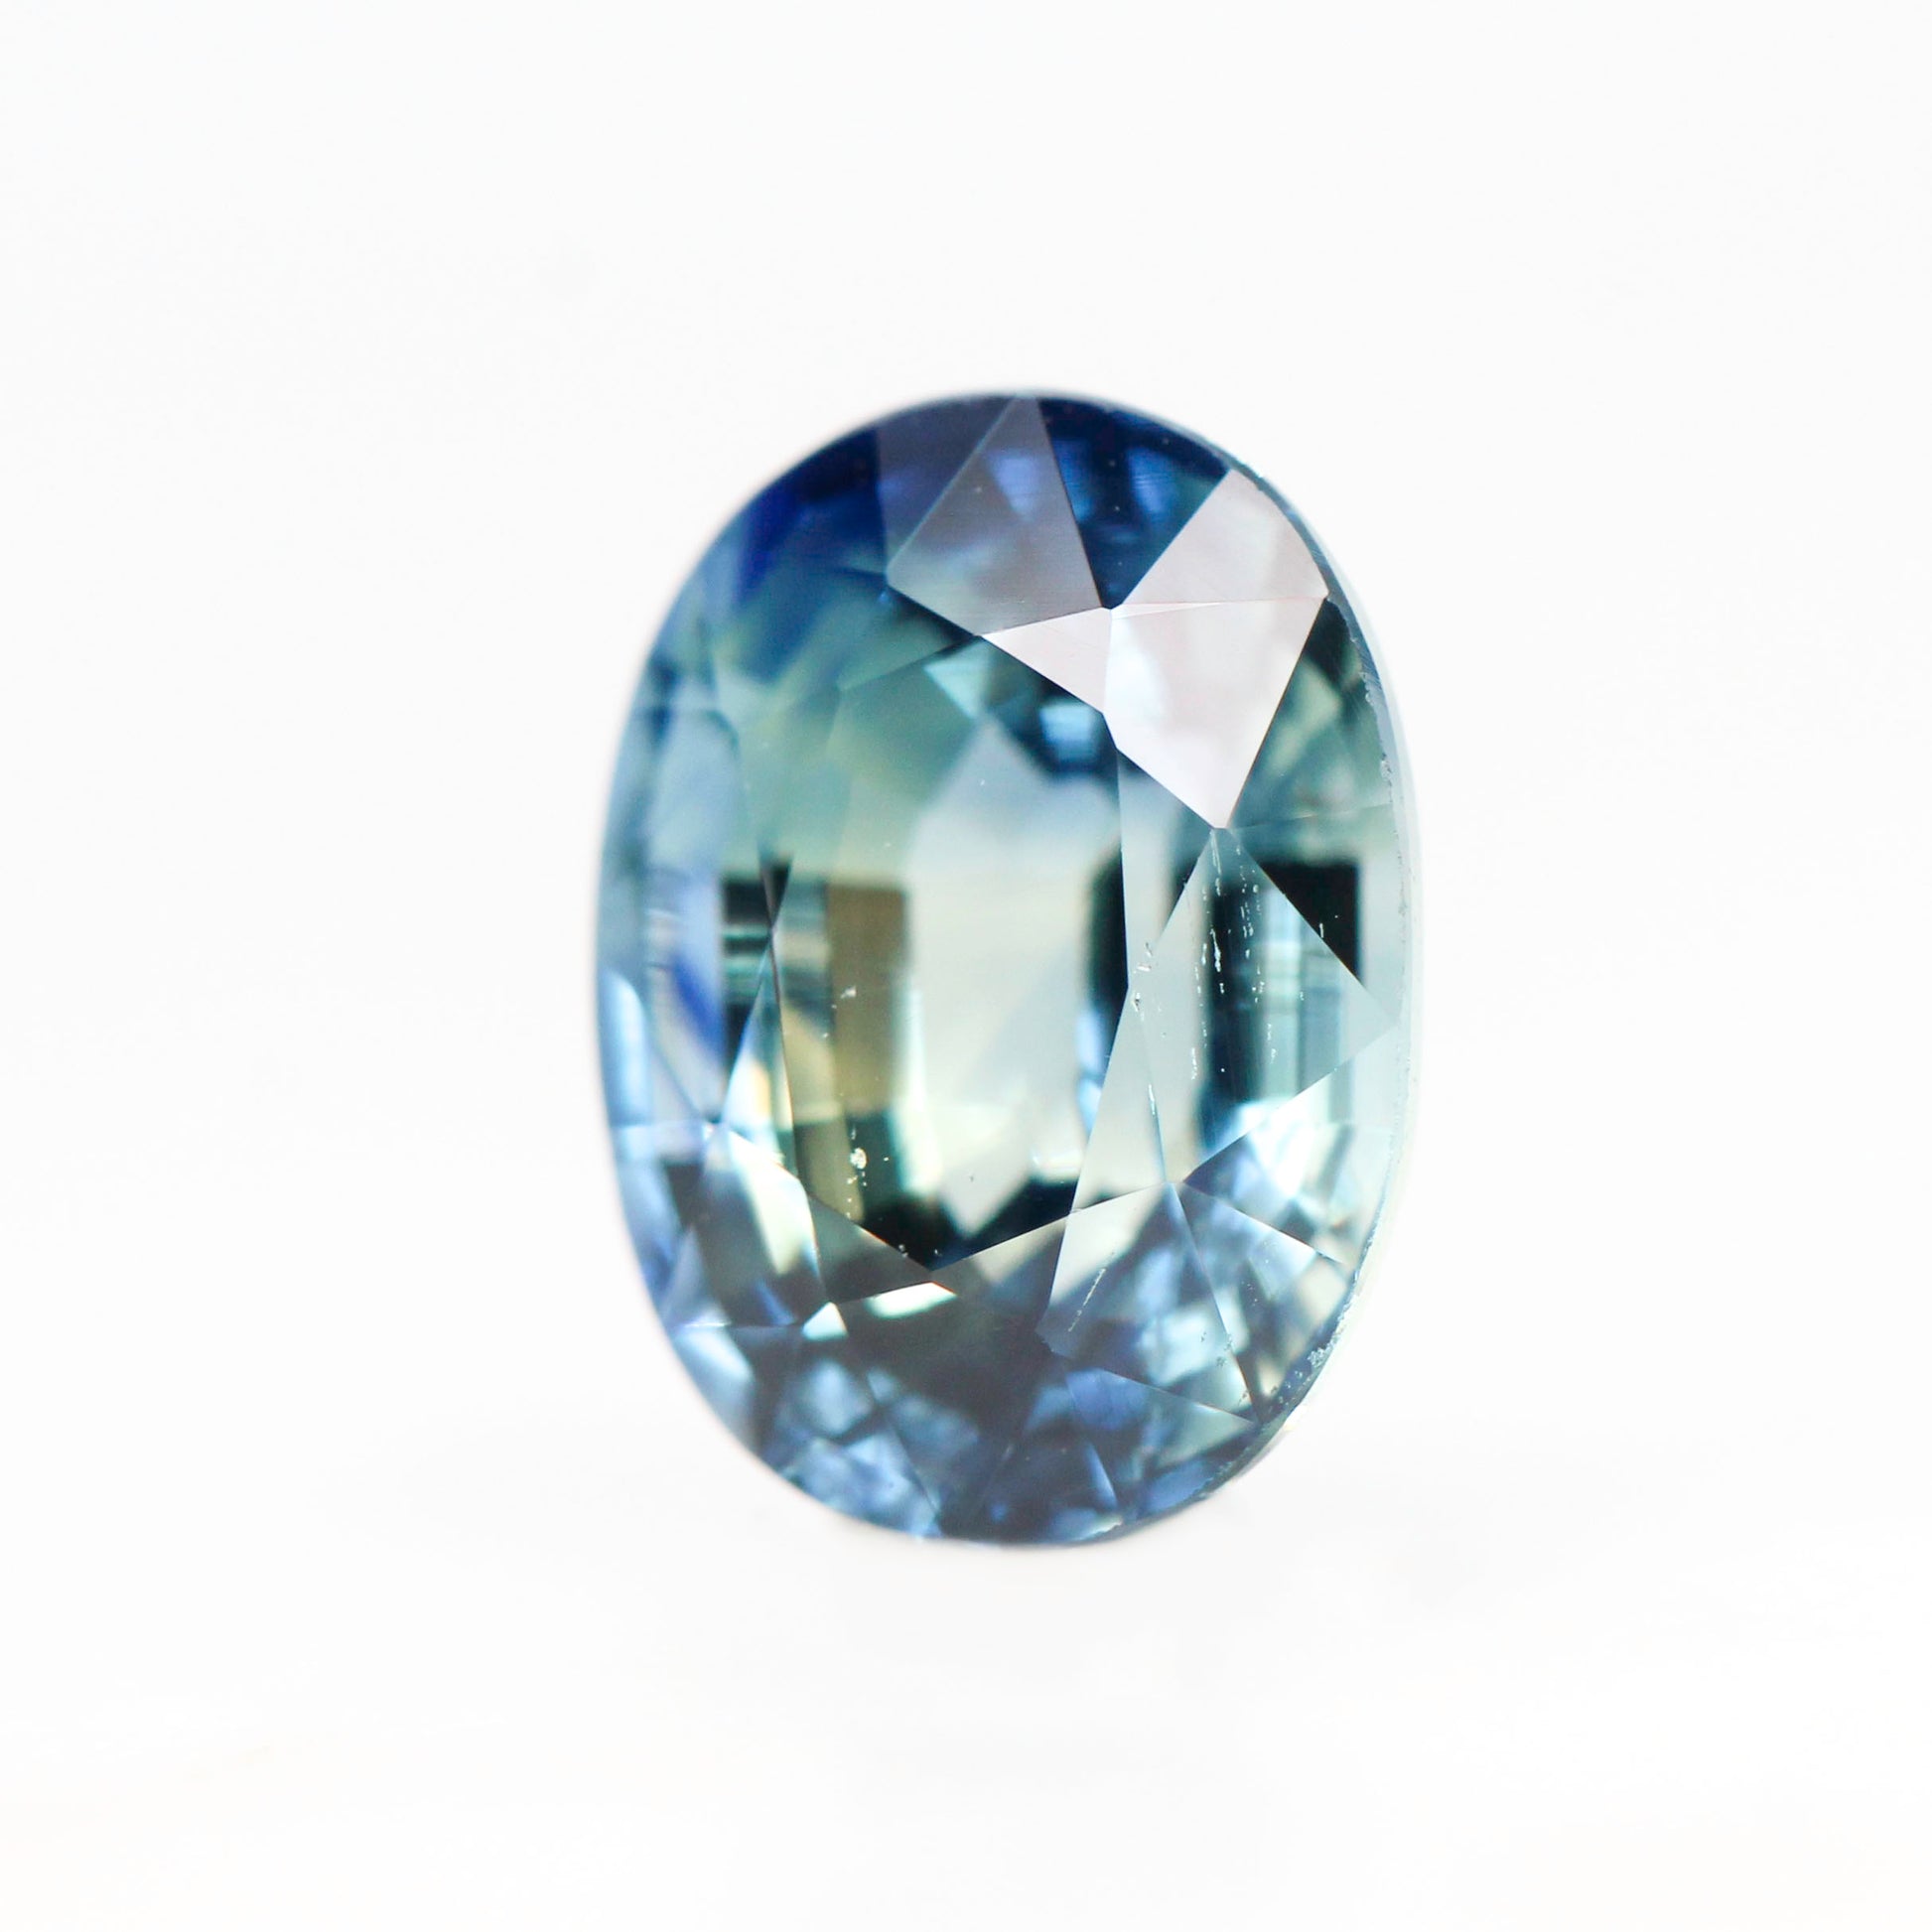 2.22 Carat Teal Oval Sapphire for Custom Work - Inventory Code TOS222 - Midwinter Co. Alternative Bridal Rings and Modern Fine Jewelry